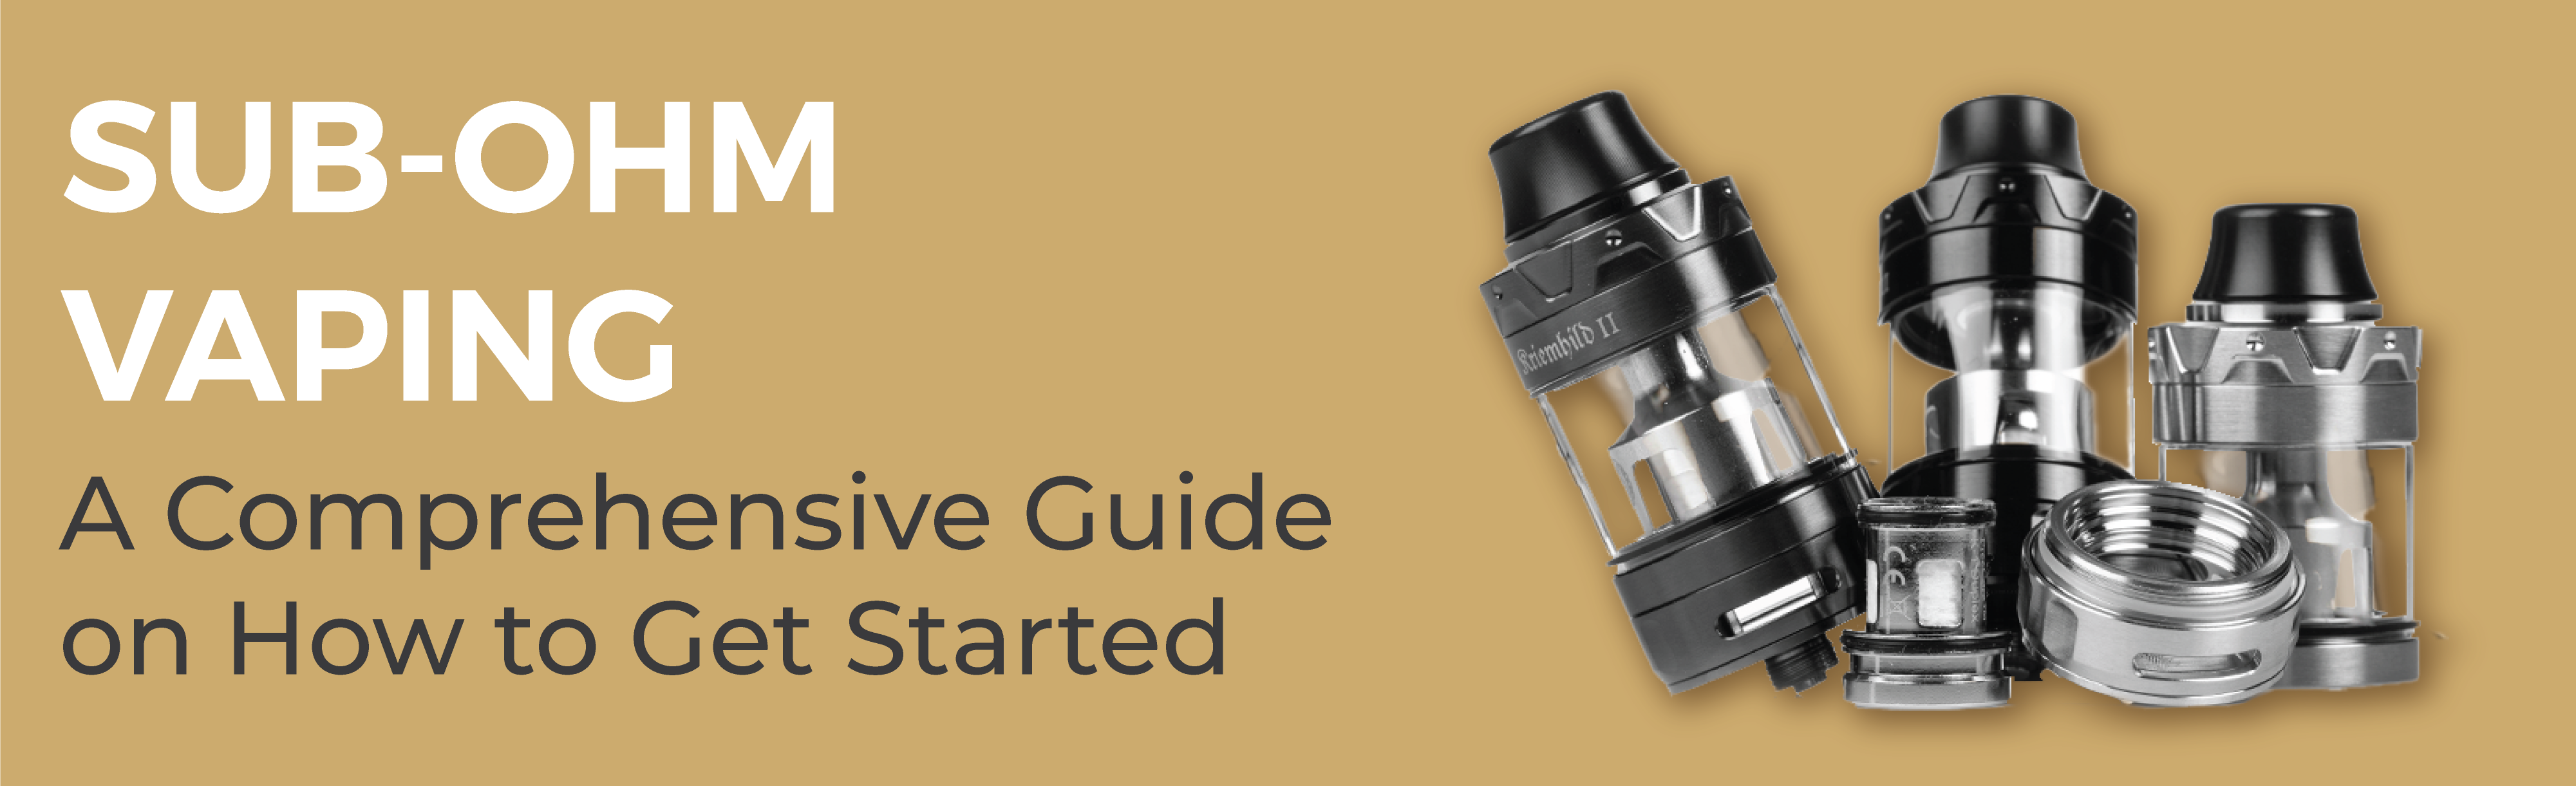 Thinking About Sub-Ohm Vaping? A Brief Guide for Beginners